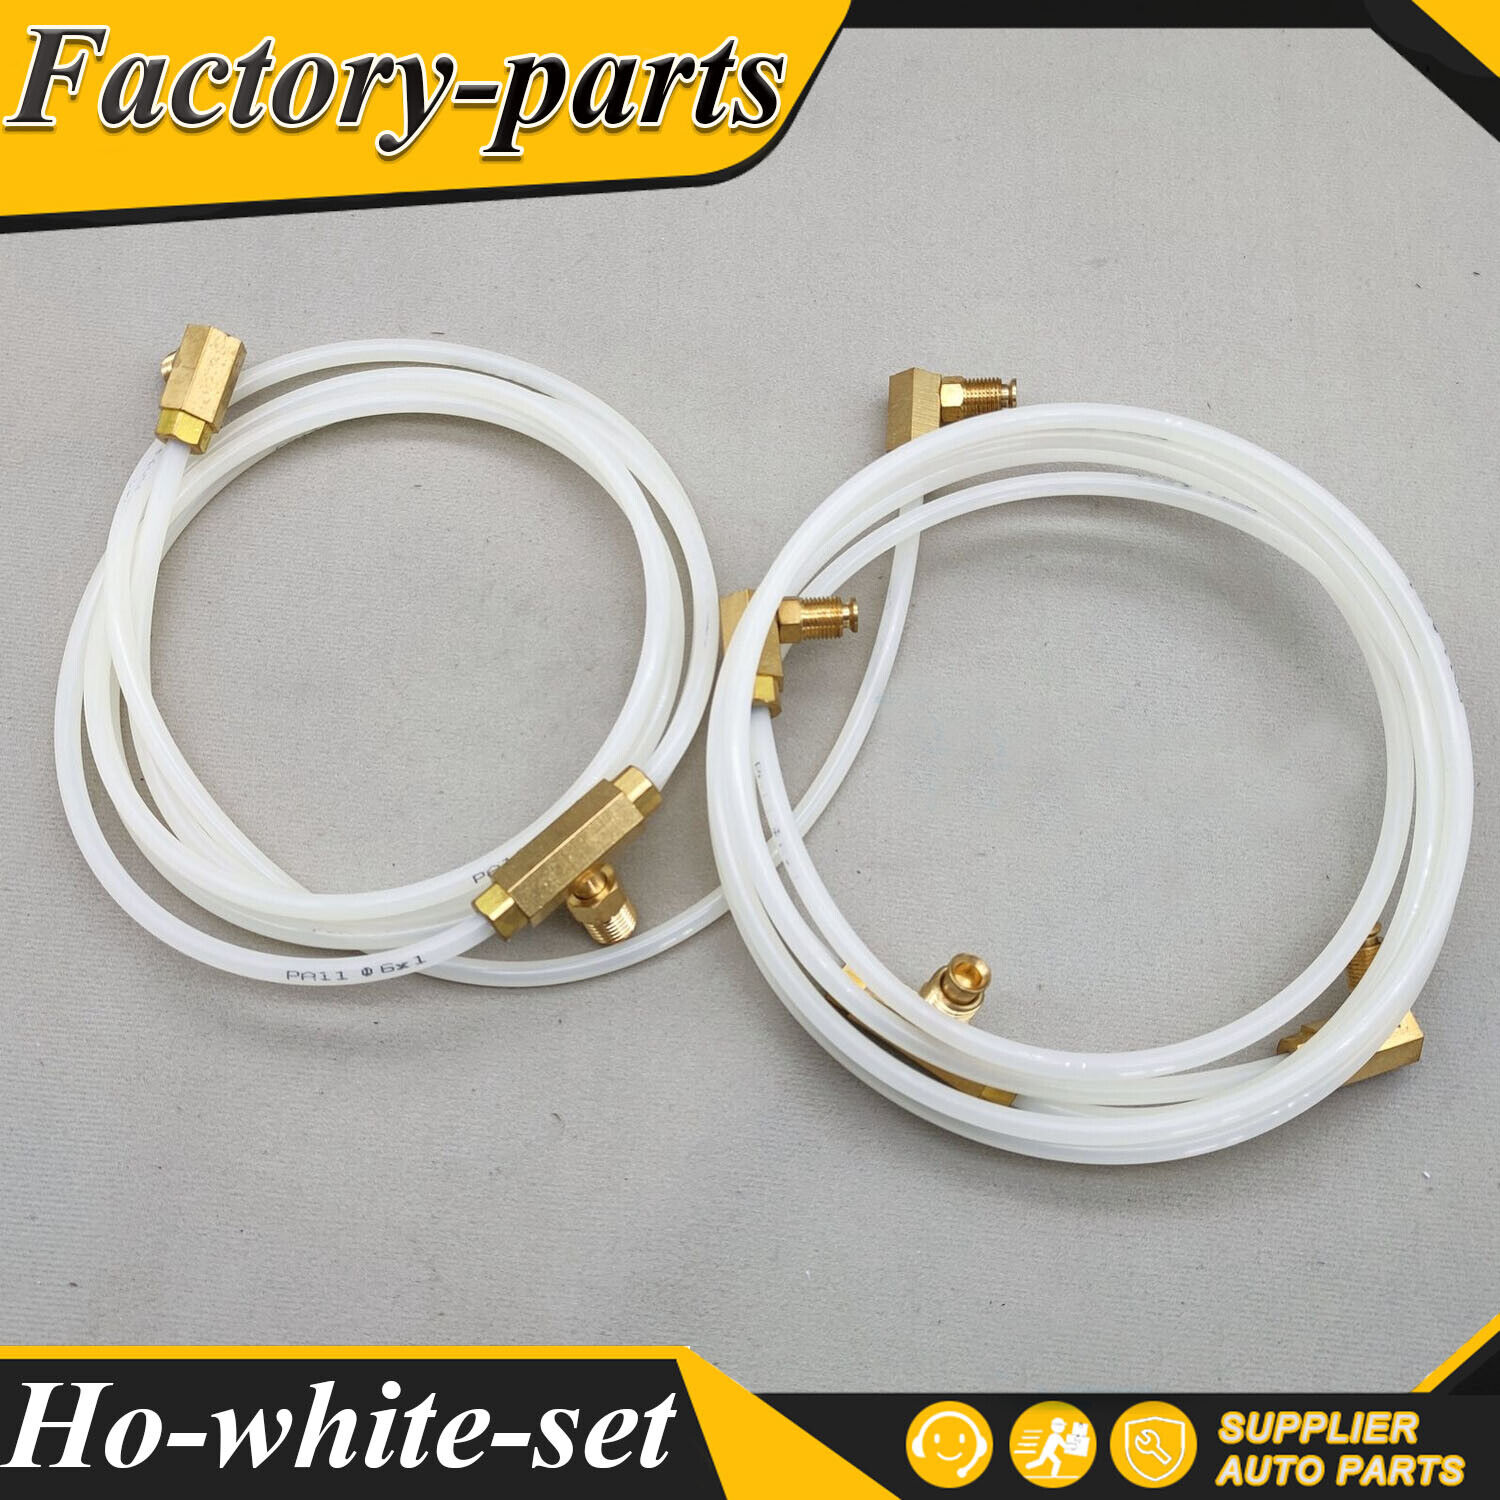 Pair Convertible Top Hydraulic Fluid Hose Lines For 1965-1970 Chevrolet Impala